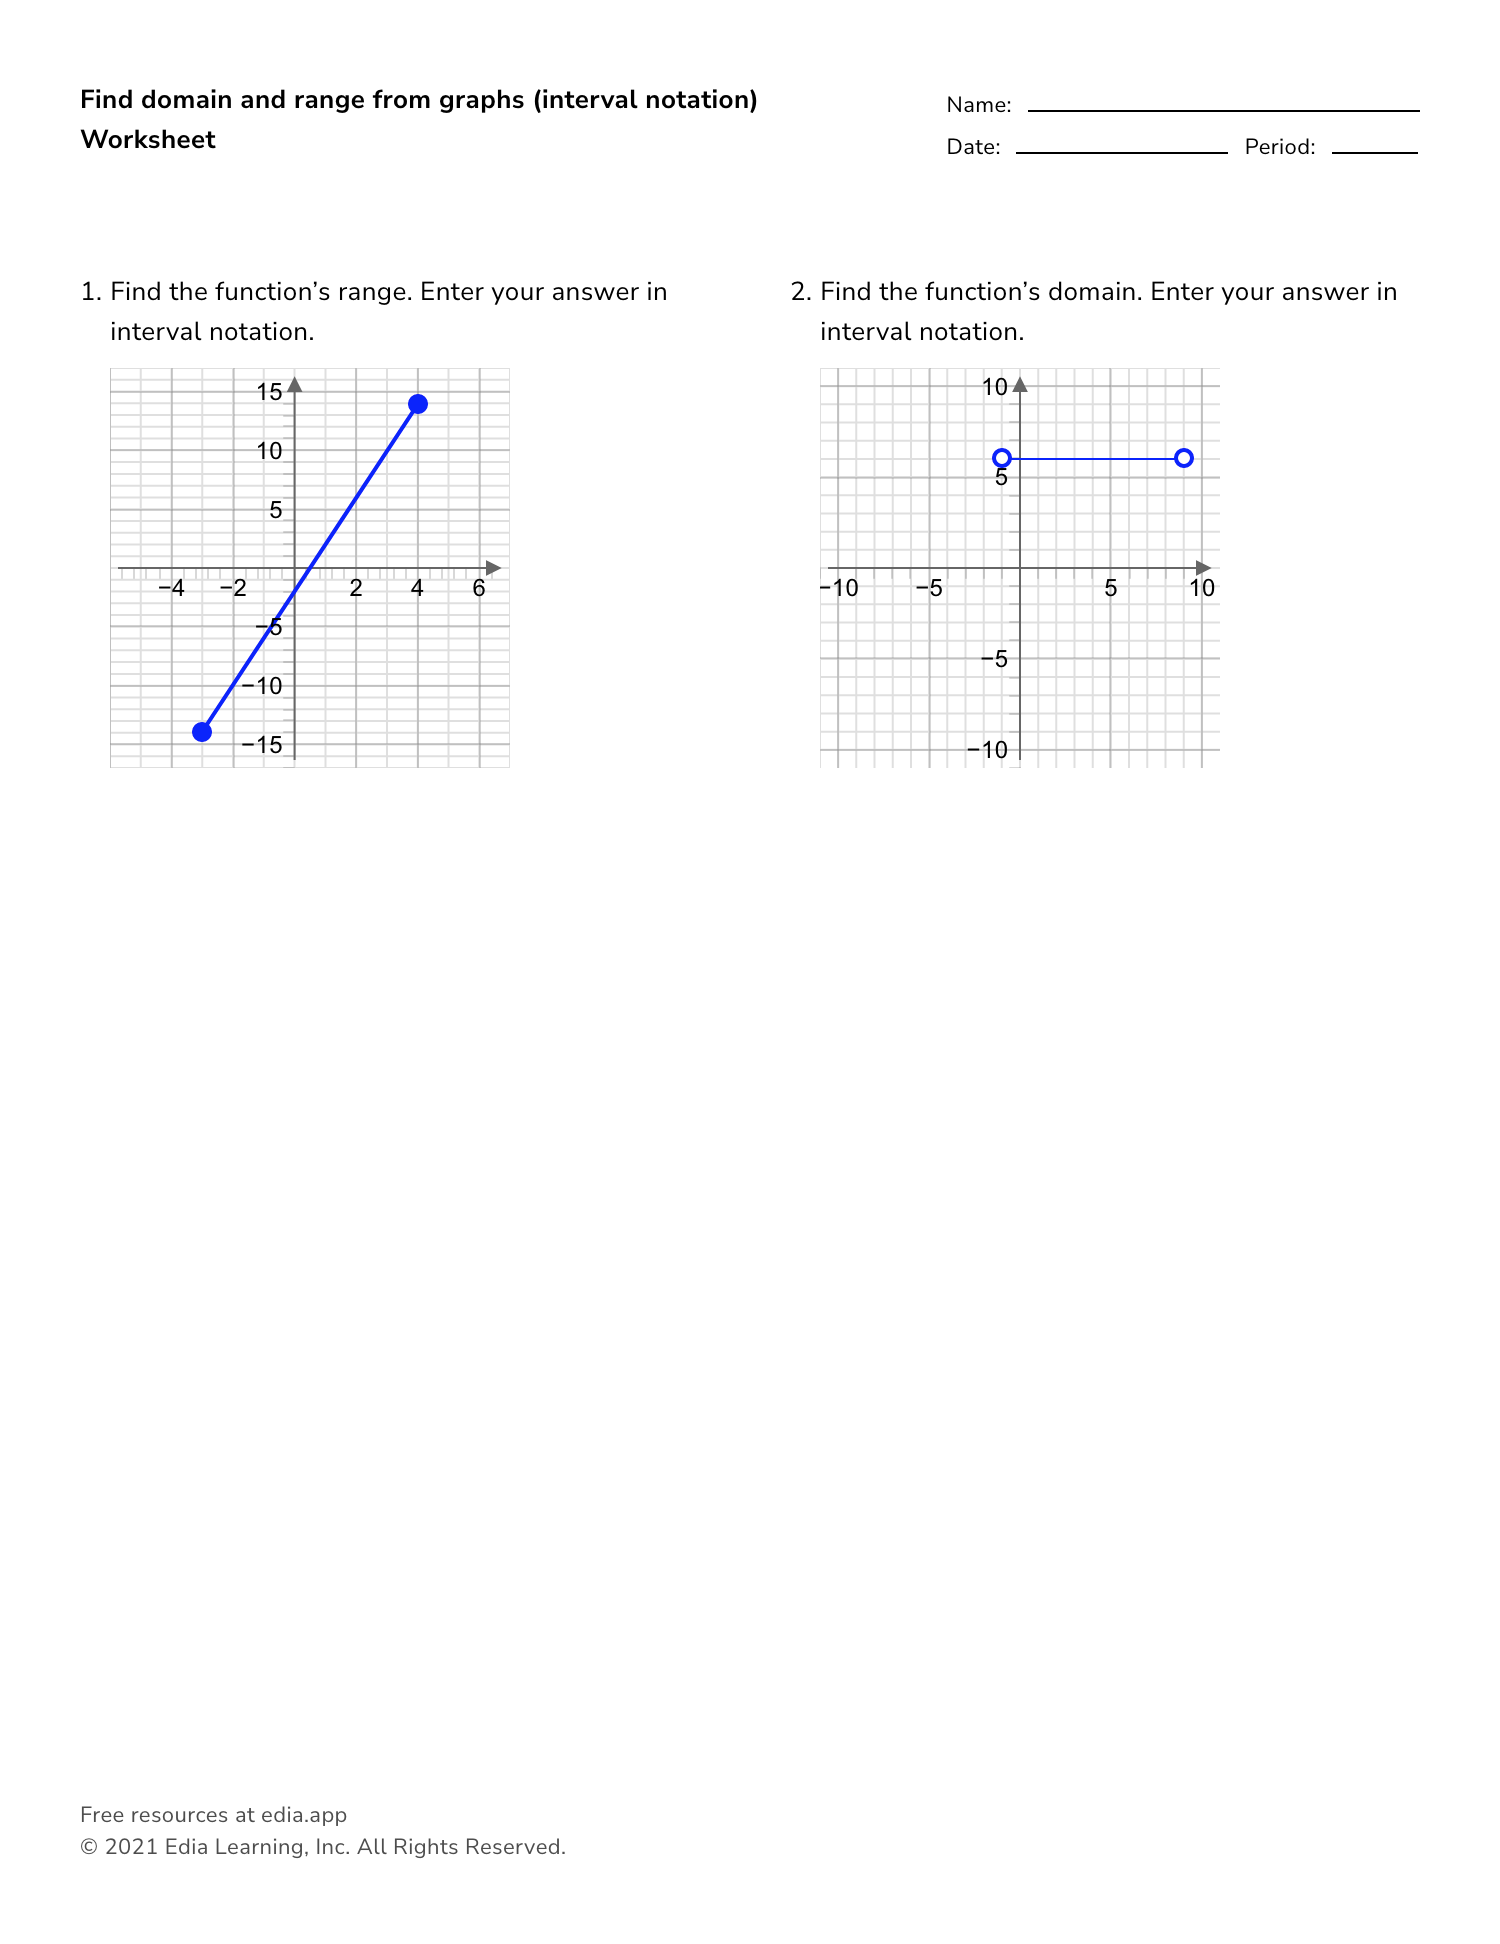 Find Domain And Range From Graphs (interval Notation) - Worksheet Inside Interval Notation Worksheet With Answers